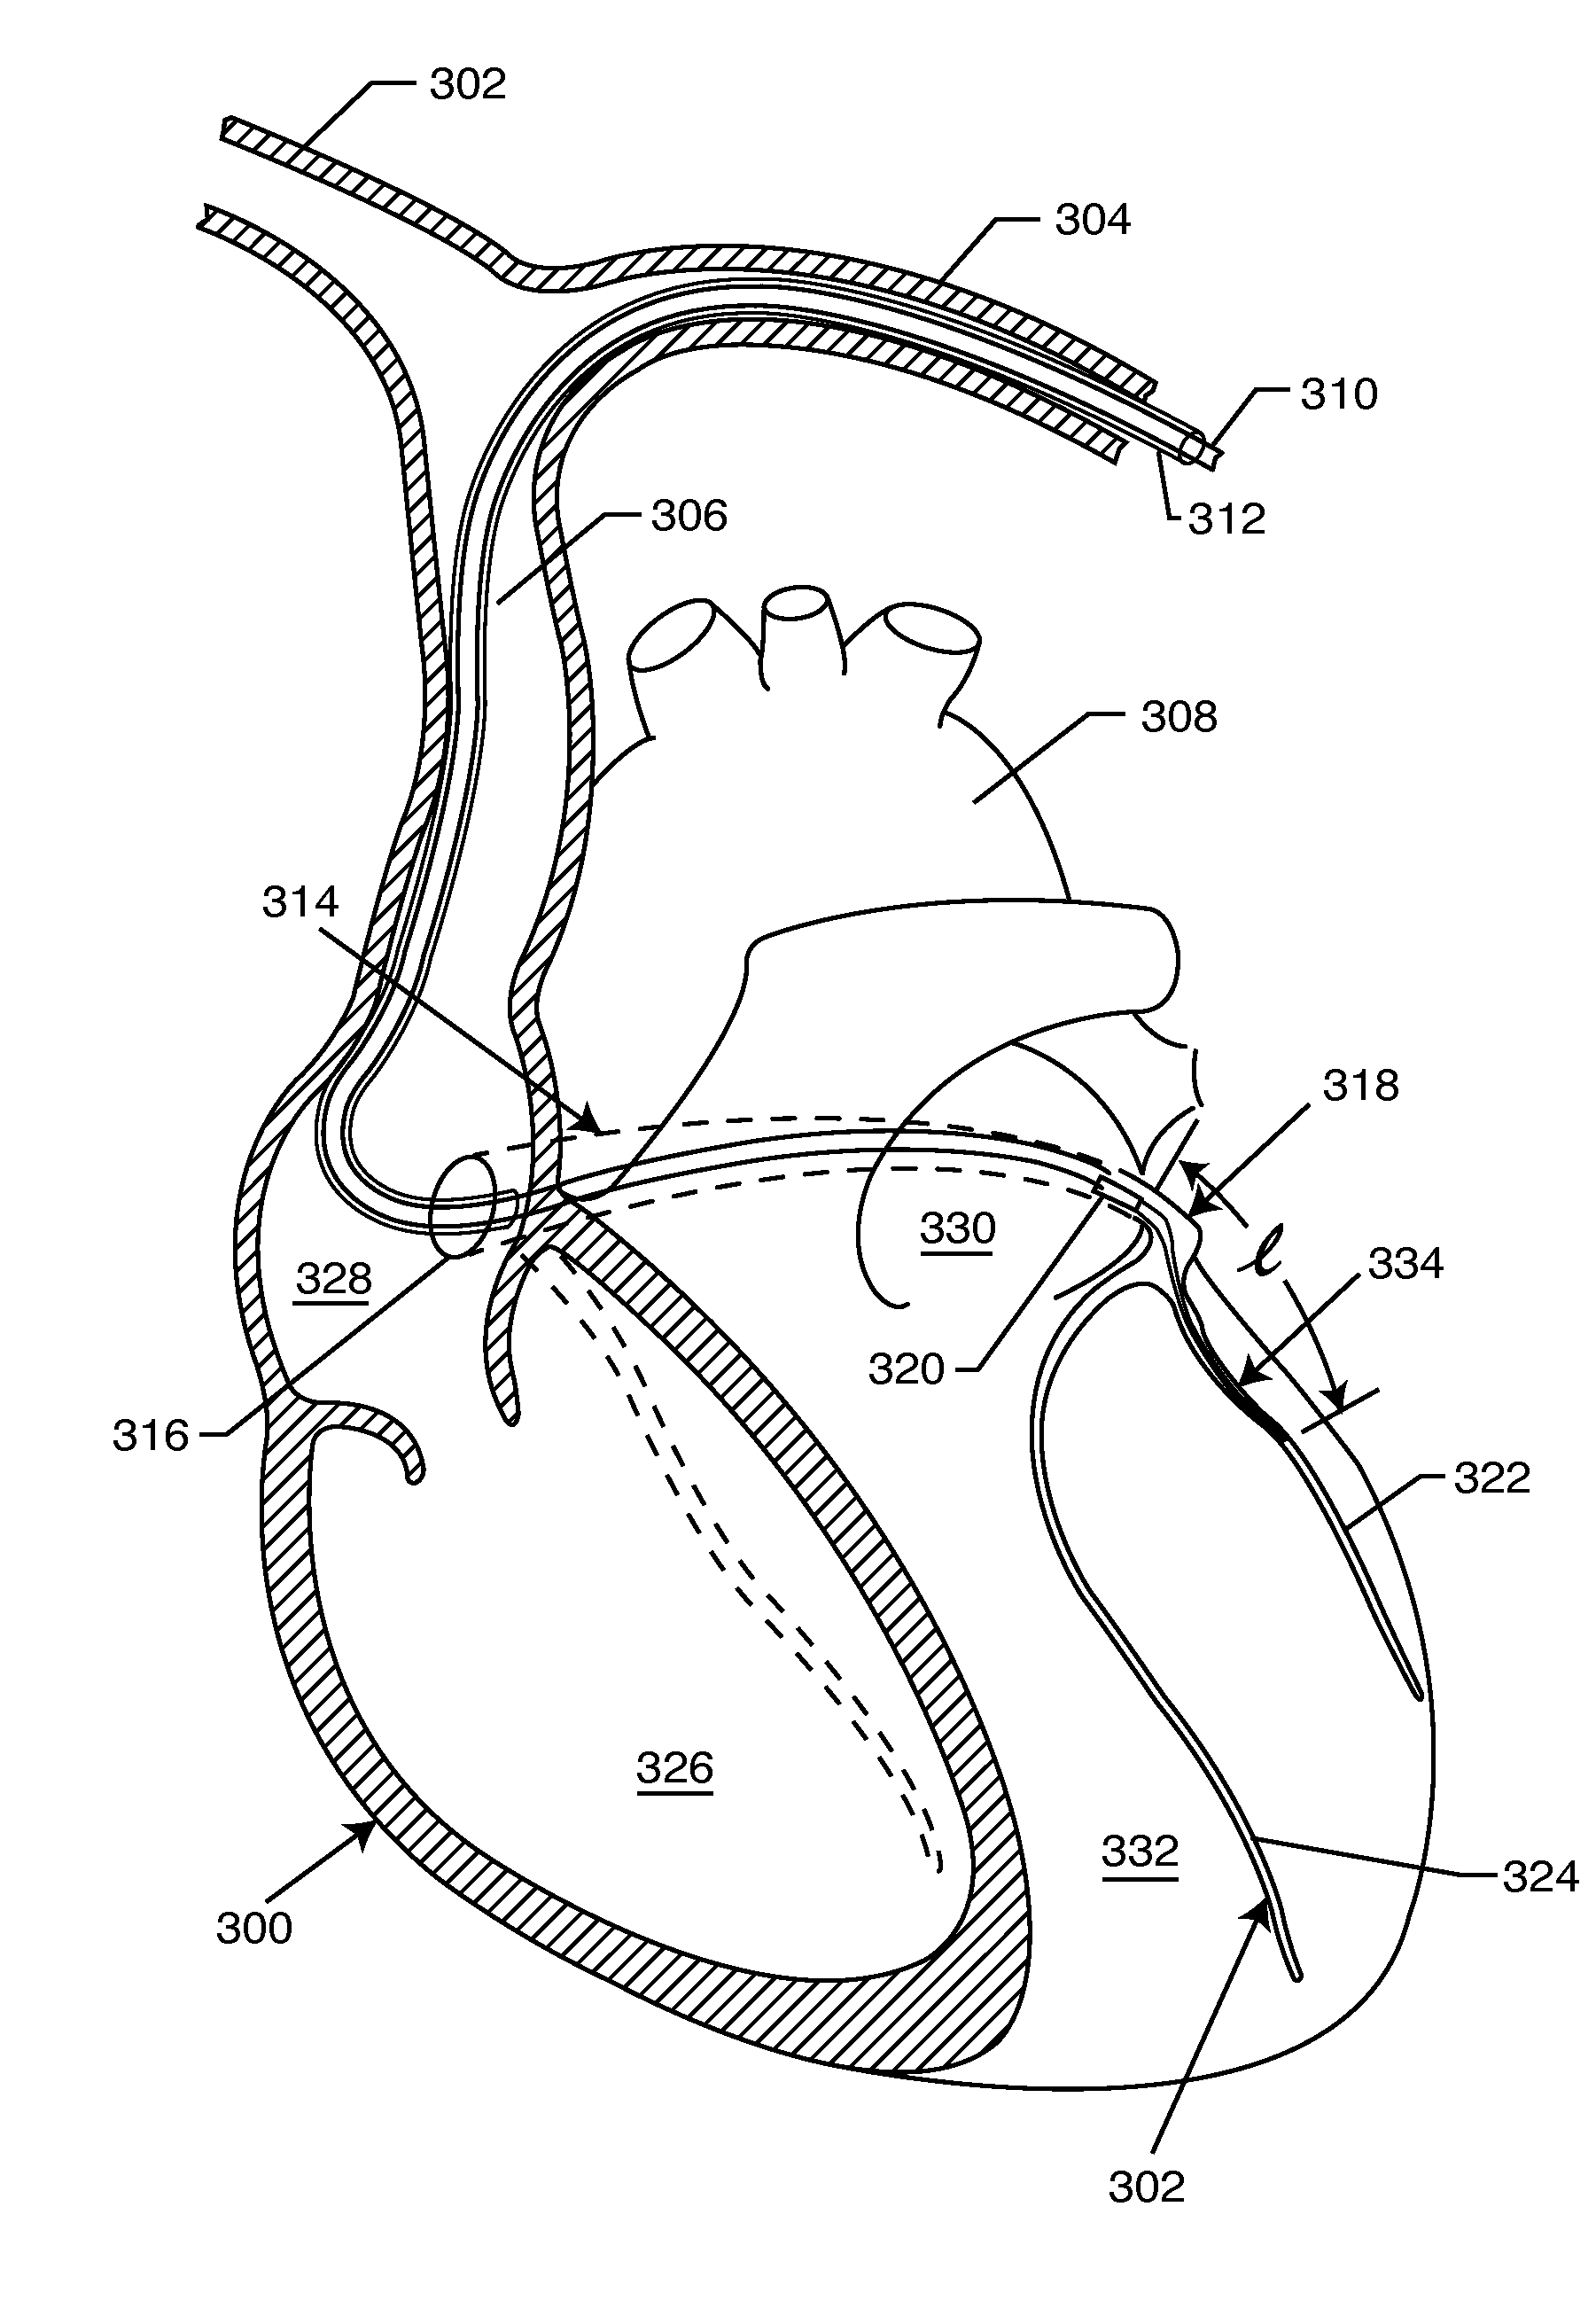 Electronic network components utilizing biocompatible conductive adhesives for direct body fluid exposure